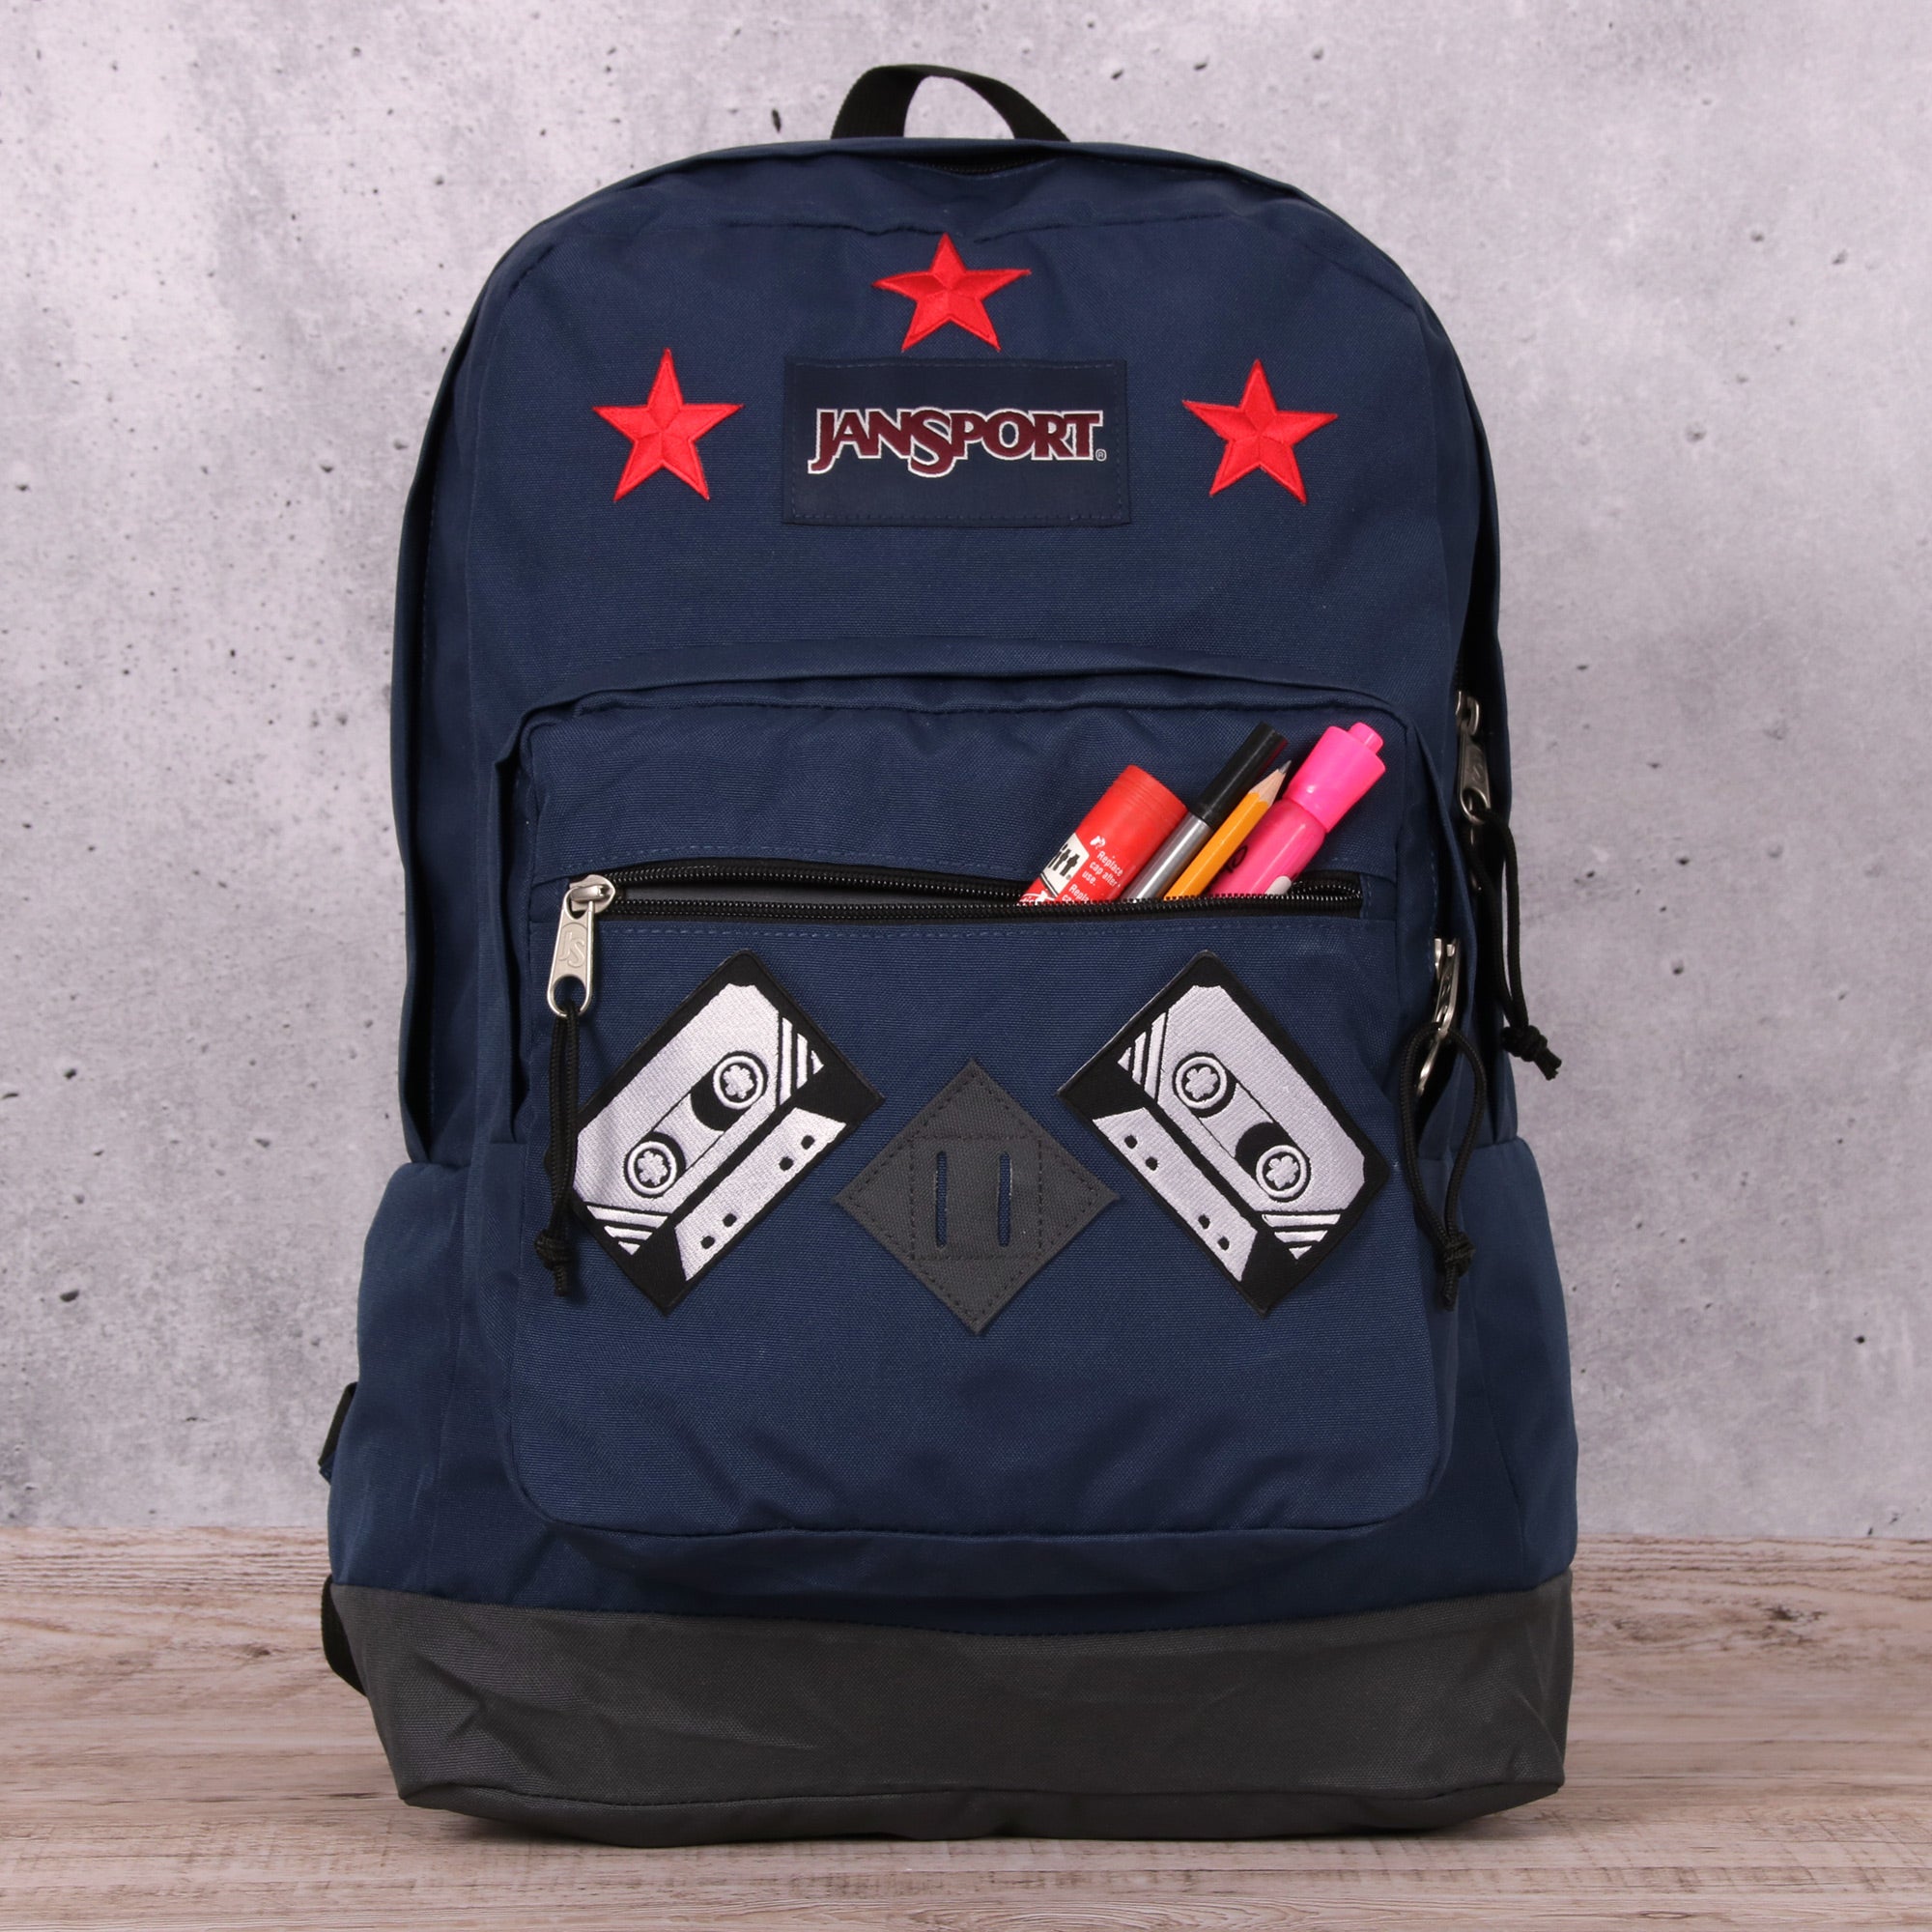 Personalise Your Backpack